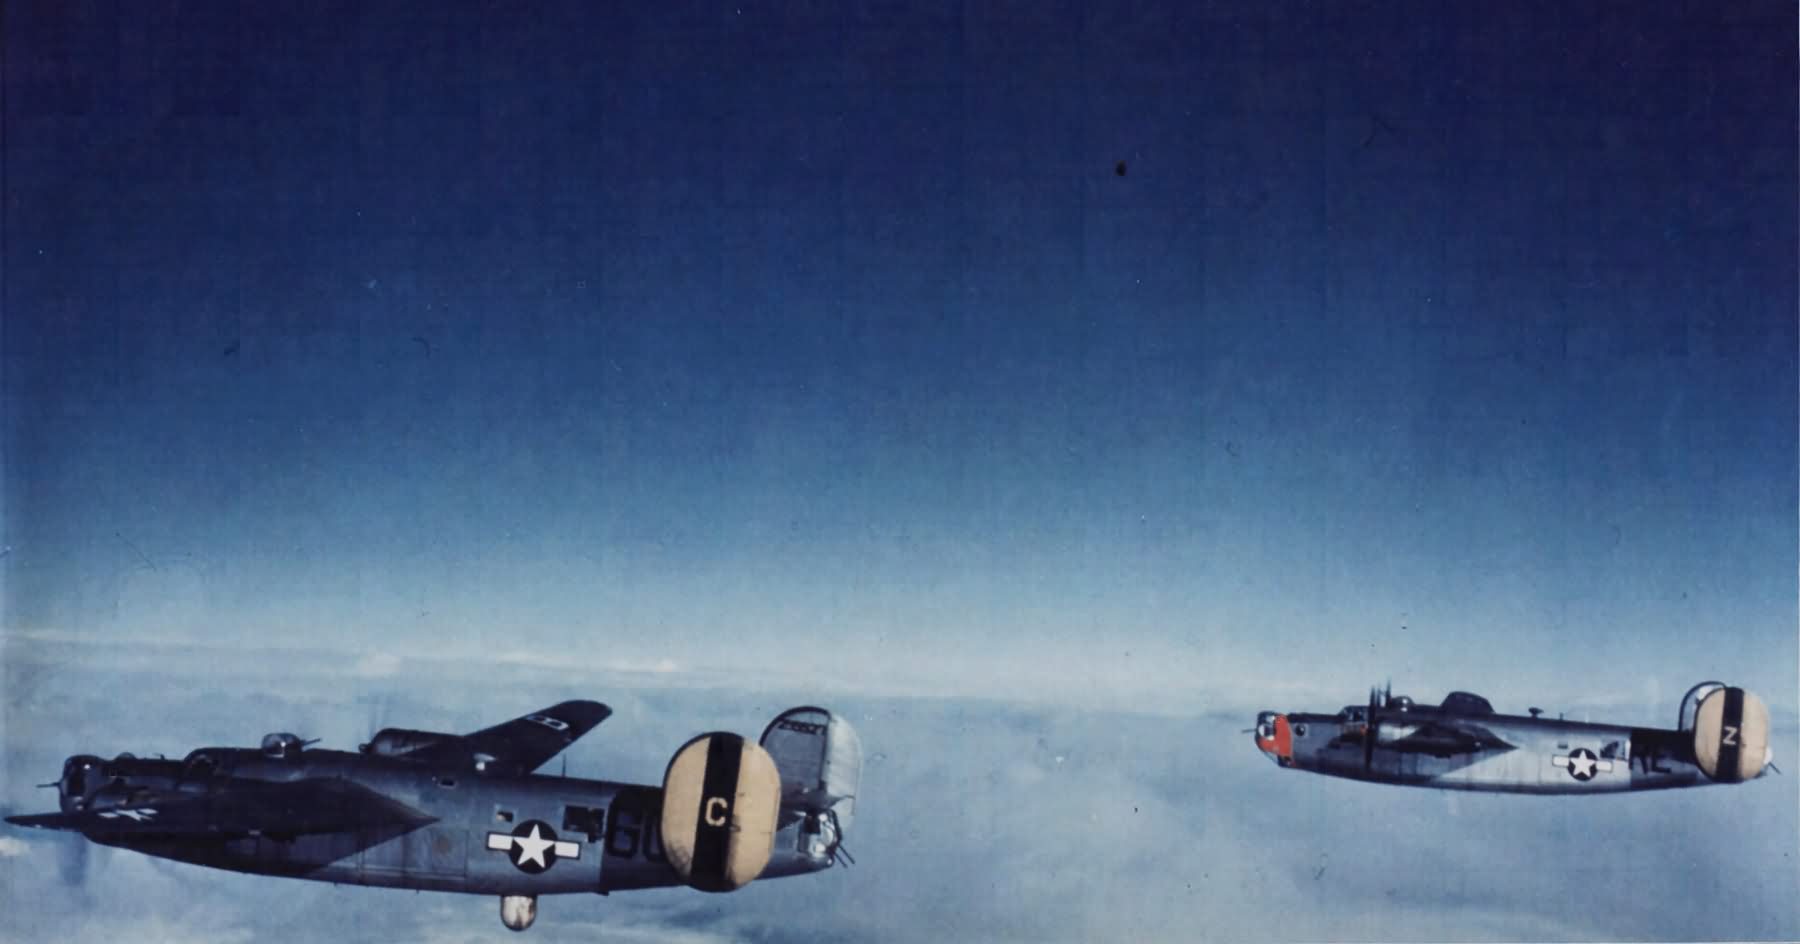 Named_4-F_B-24J_42-95527_from_the_328th_BS_93rd_BG_8th_AF_H2X_radar_equipped_Lead_ship_and_42-...jpg